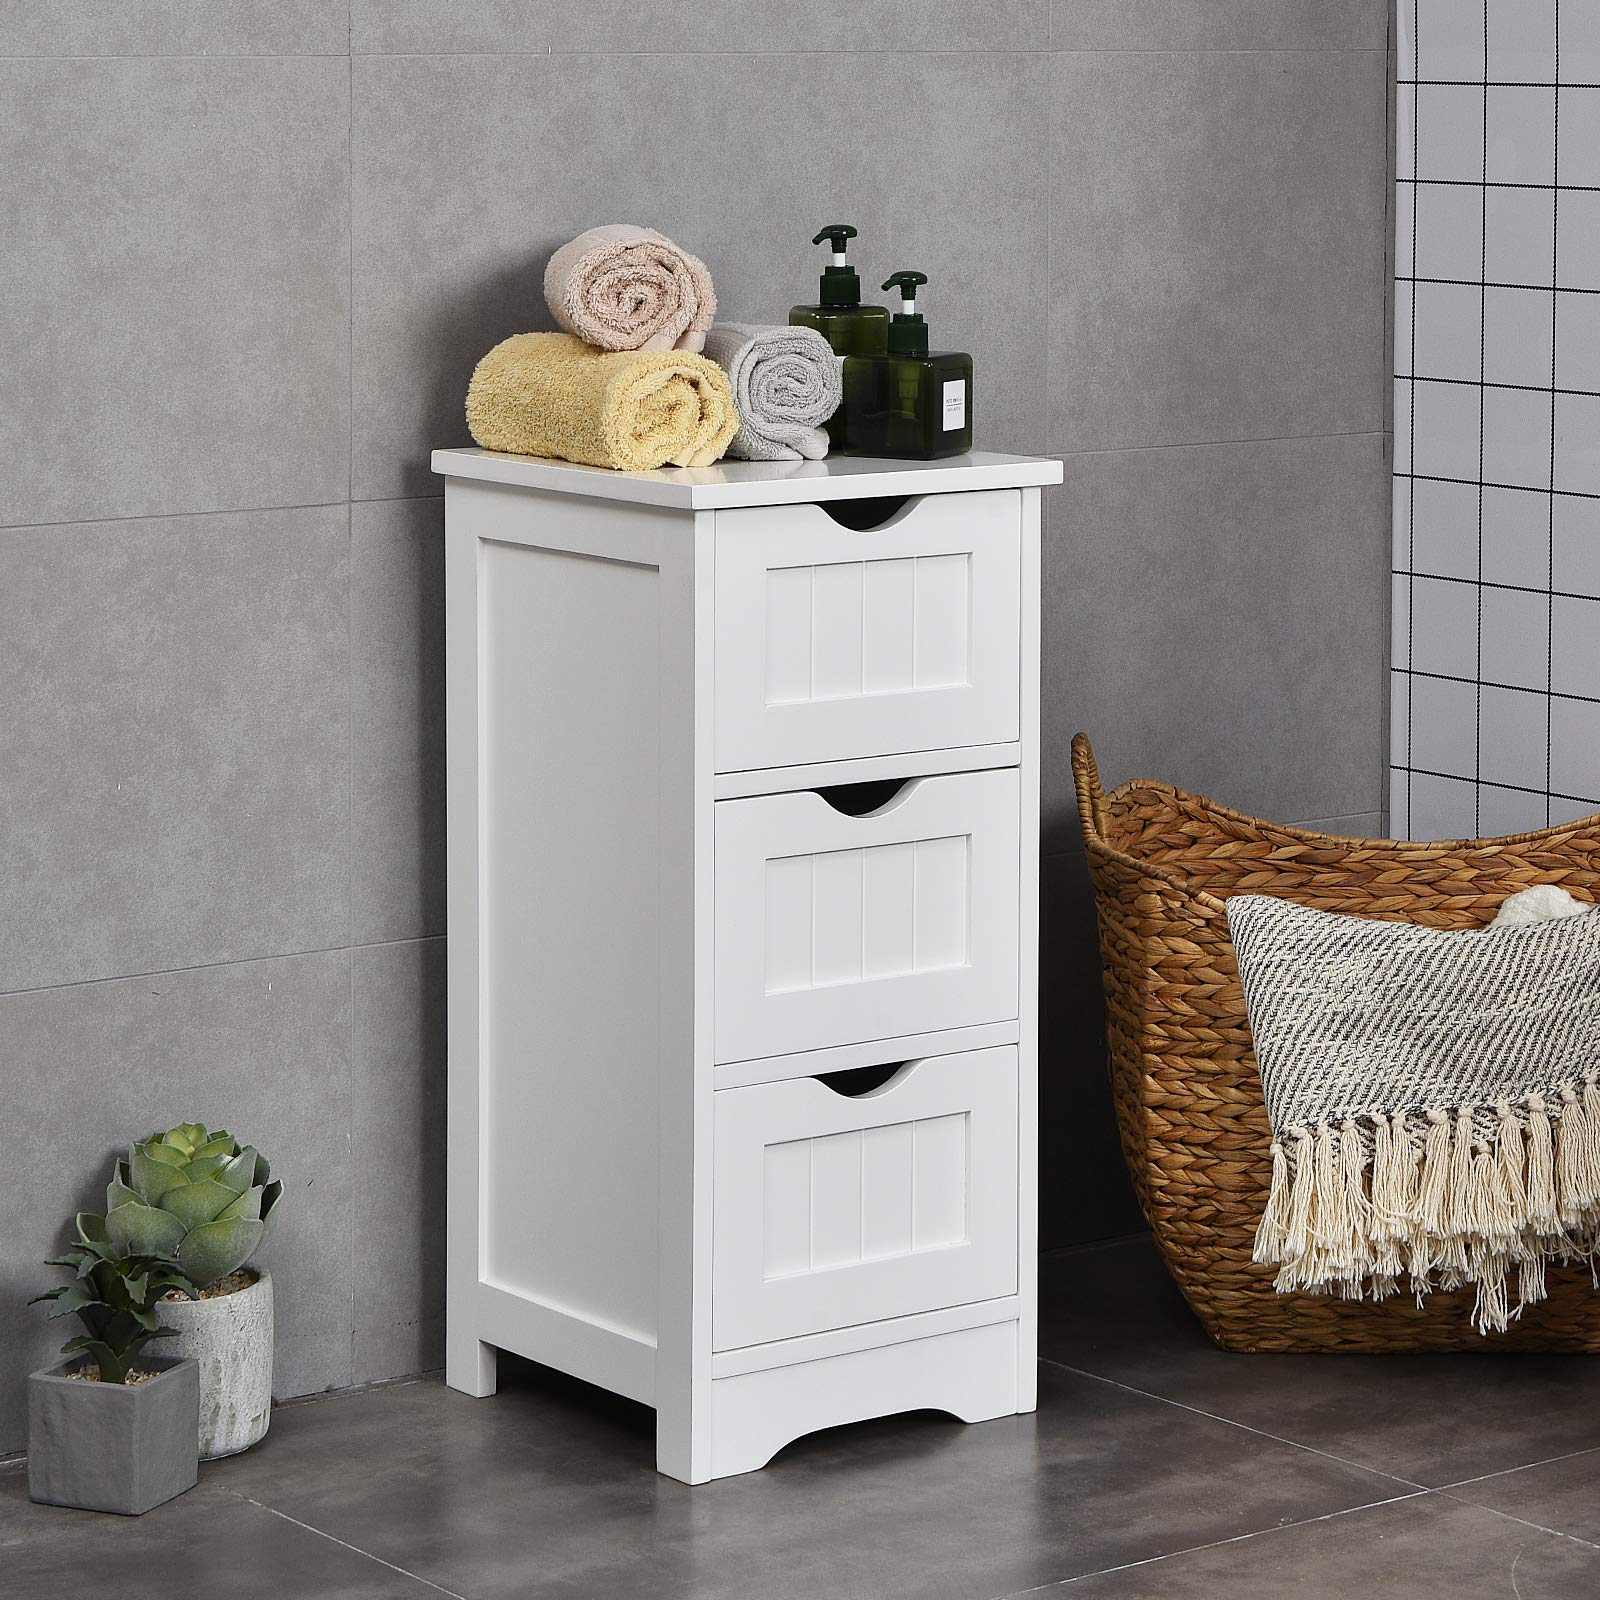 Tangkula Bathroom Floor Cabinet, Tower Storage Cabinet with Anti-Tipping Device